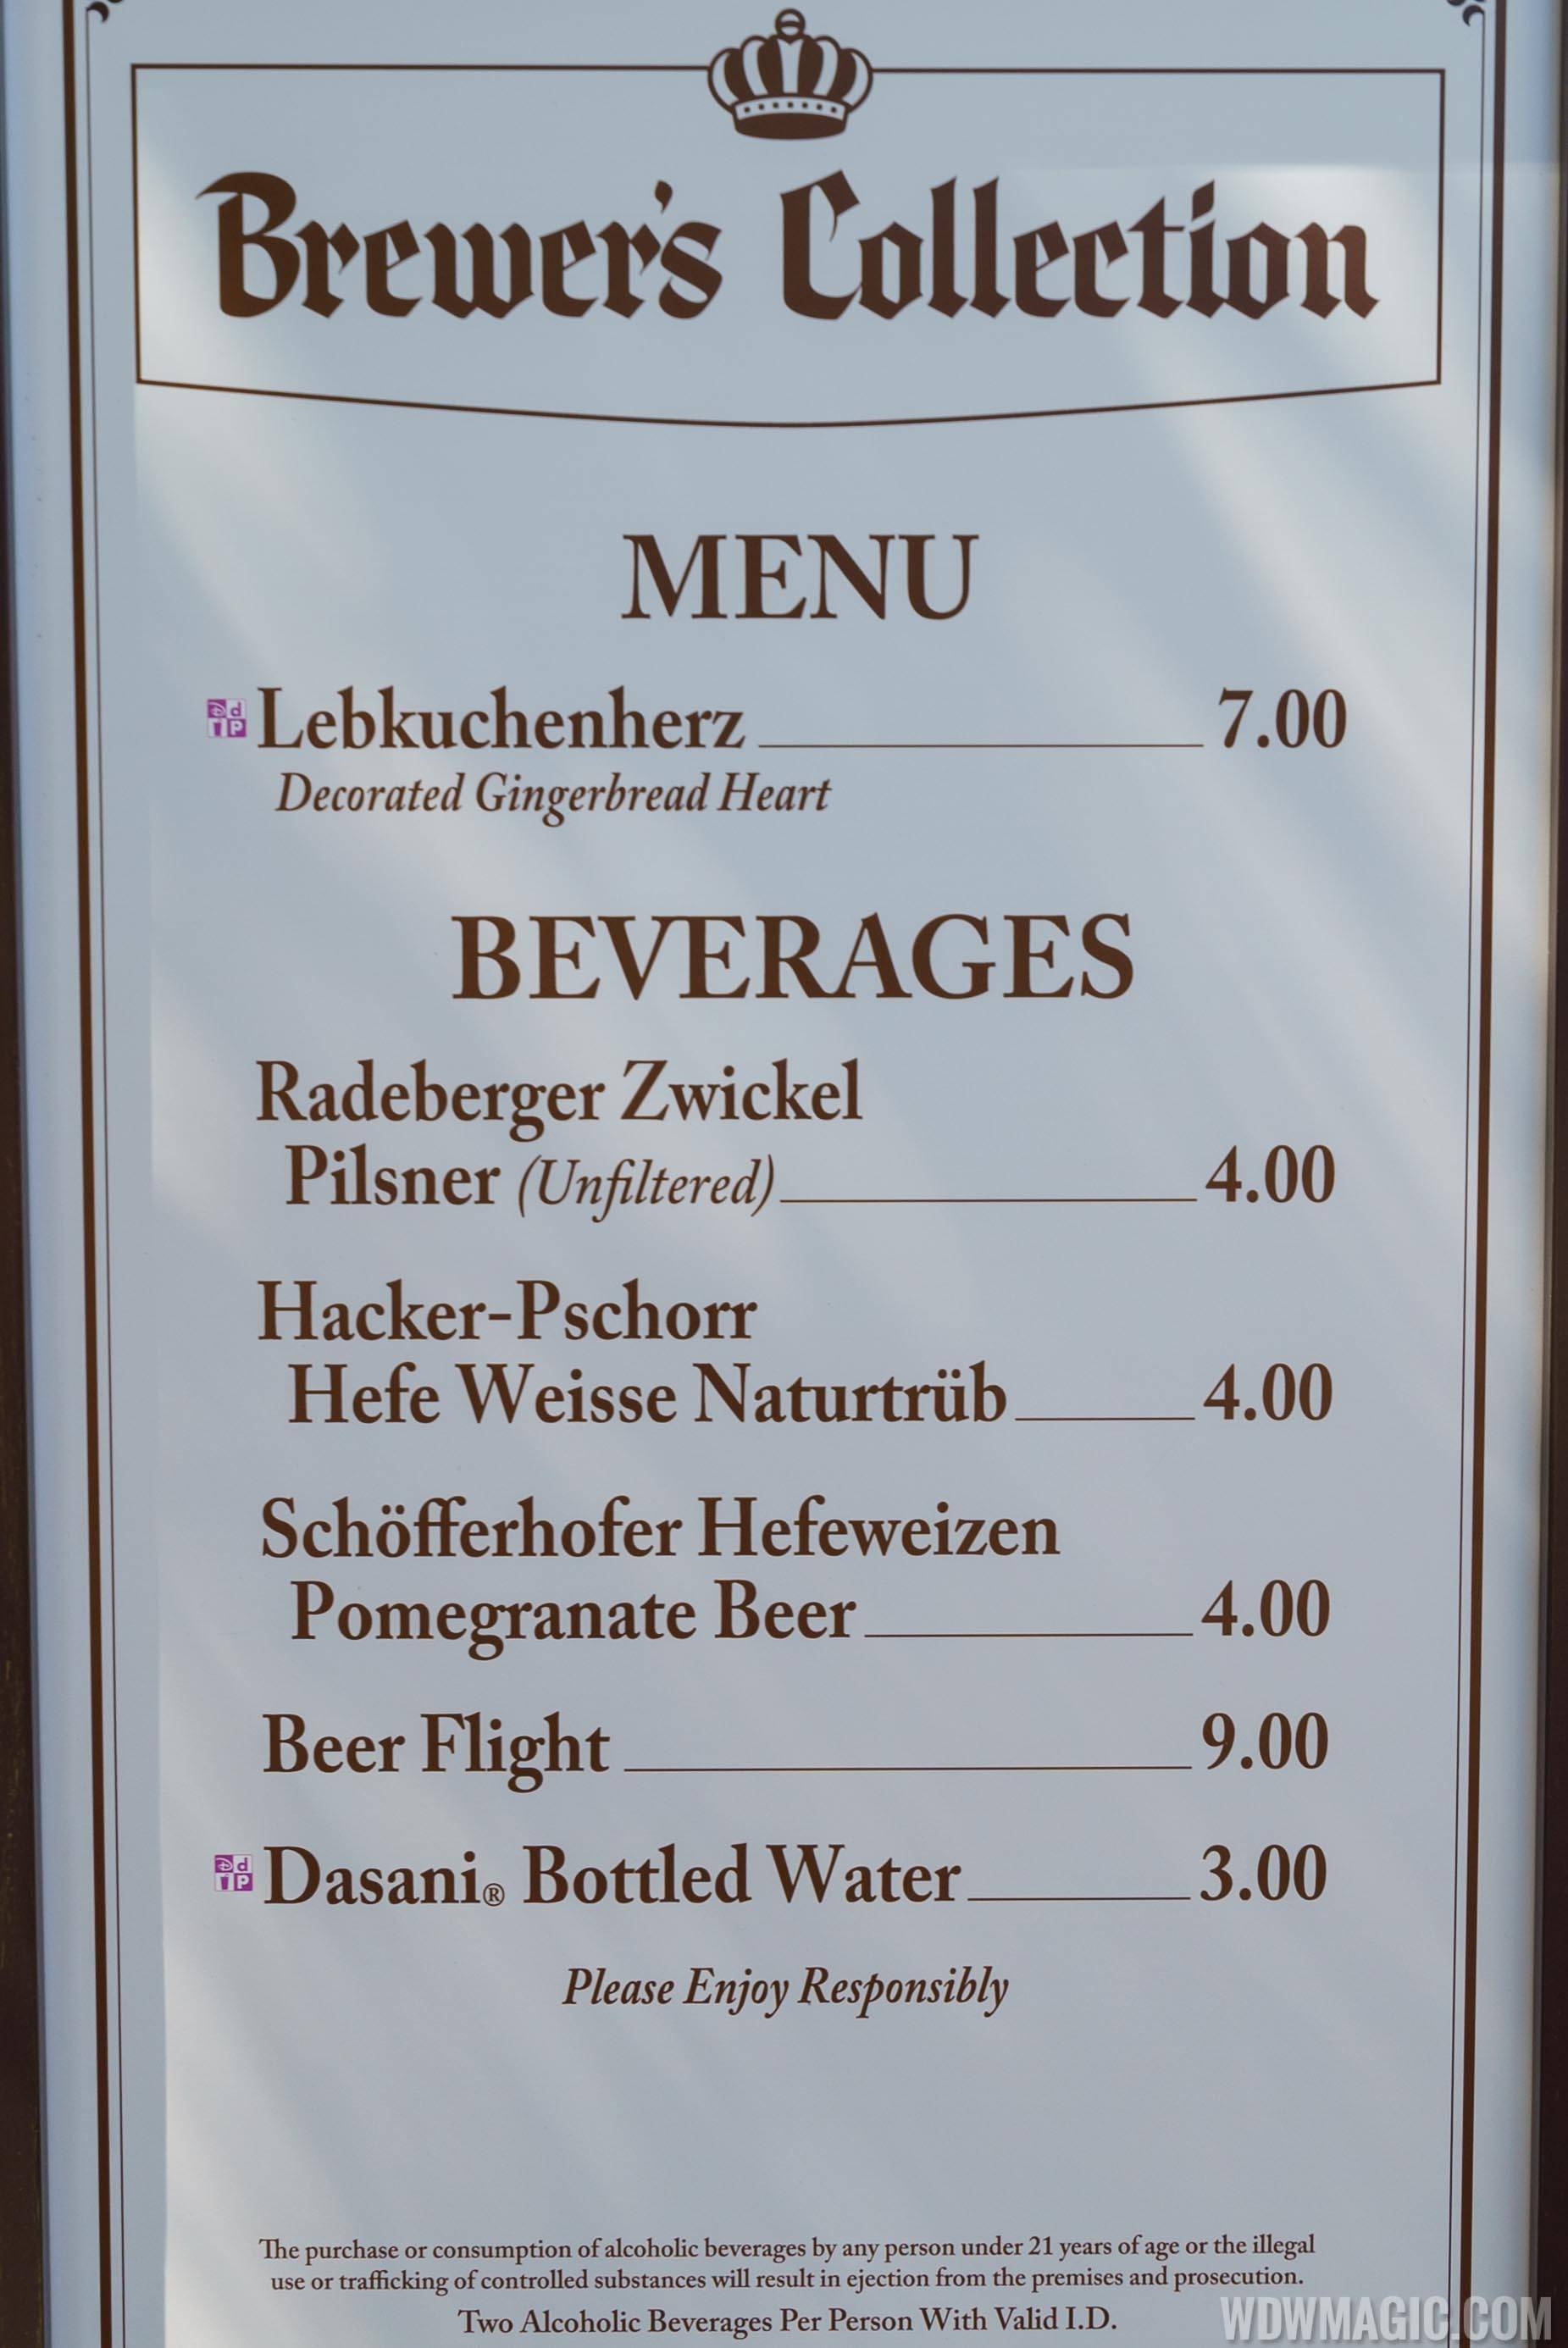 2017 Epcot Food and Wine Festival - Brewer's Collection marketplace kiosk menu